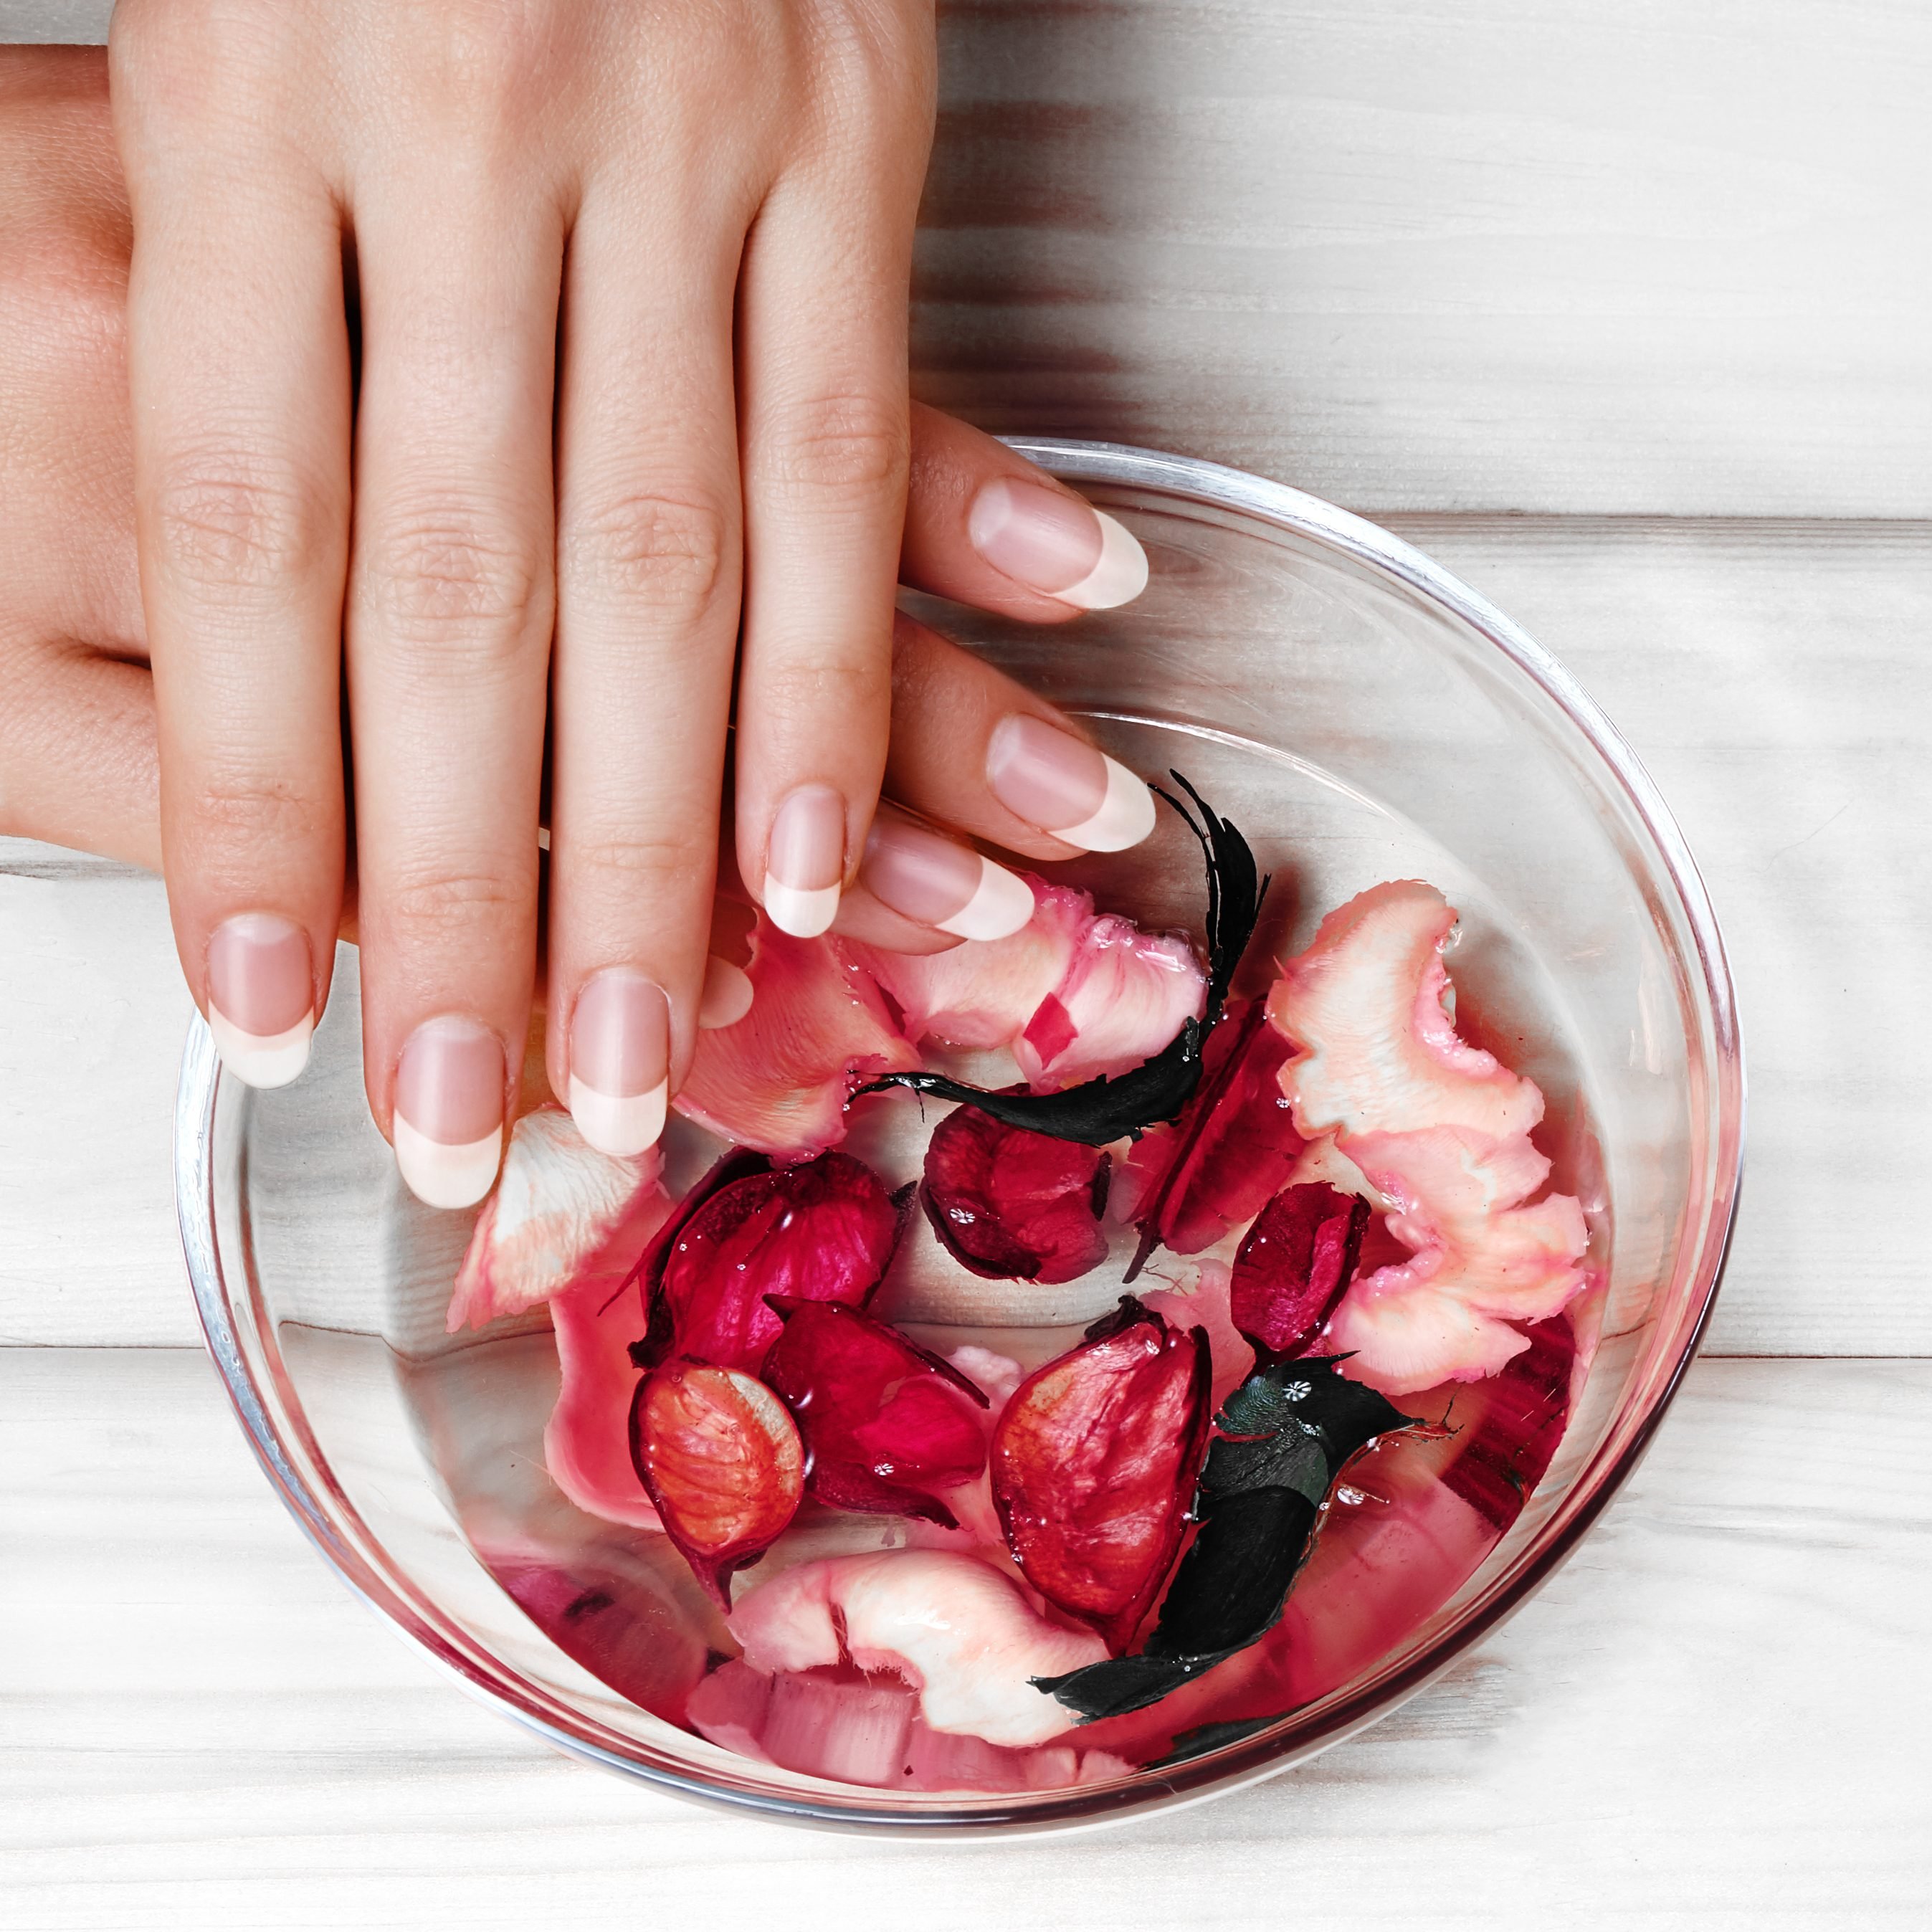 Surprising Household Items for Perfect Nails | The Healthy